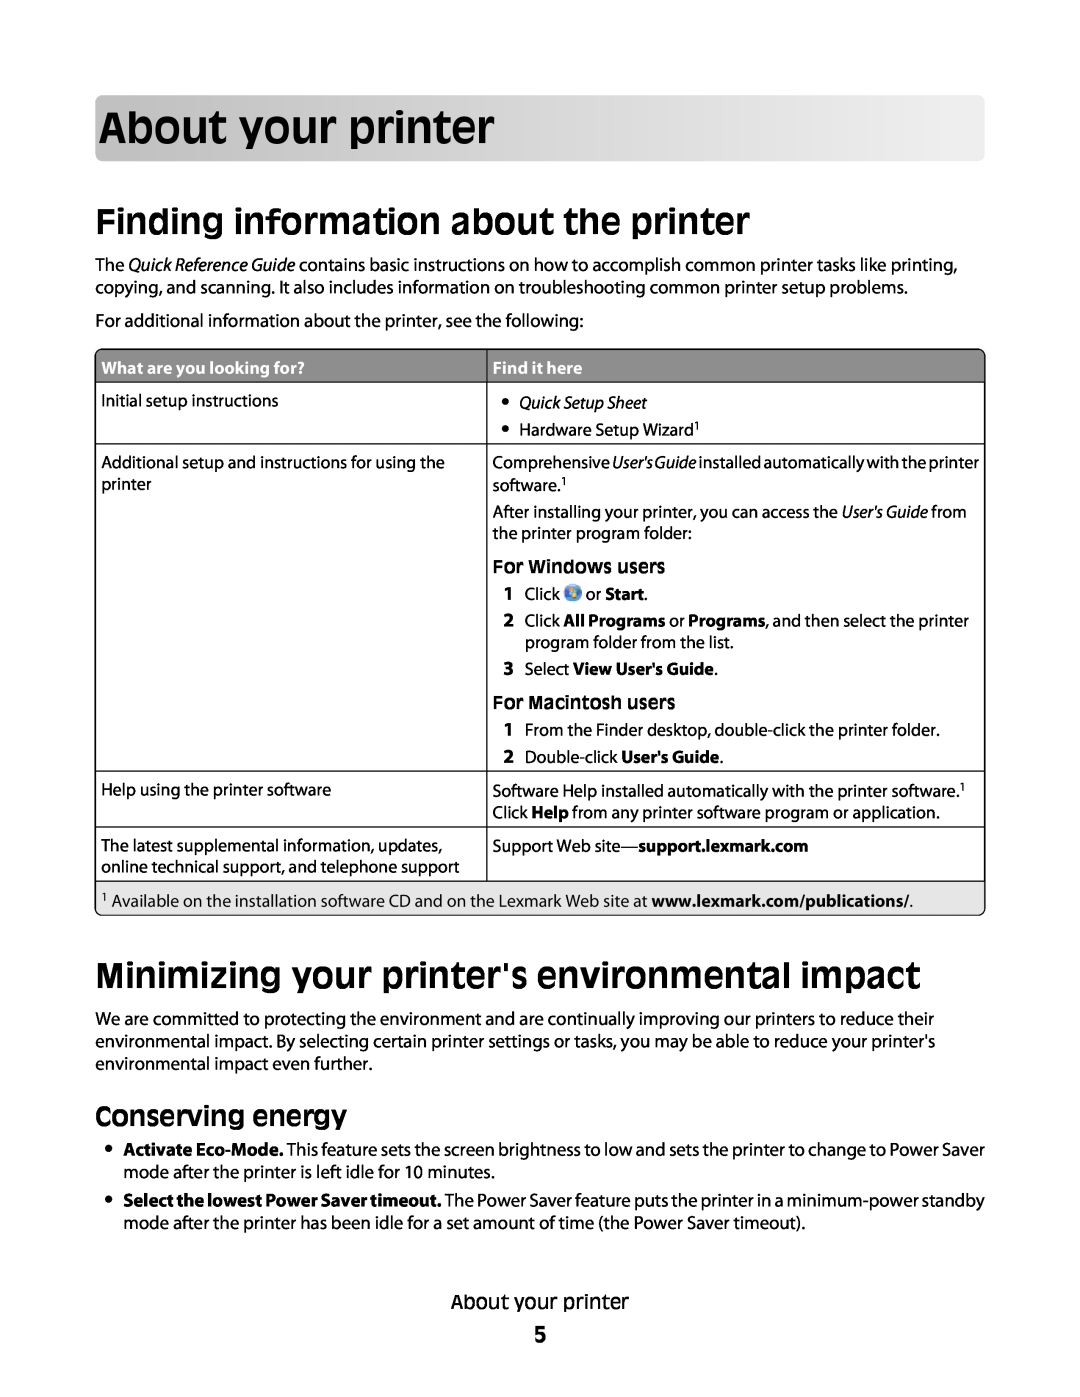 Lexmark Pro800 About your printer, Finding information about the printer, Minimizing your printers environmental impact 